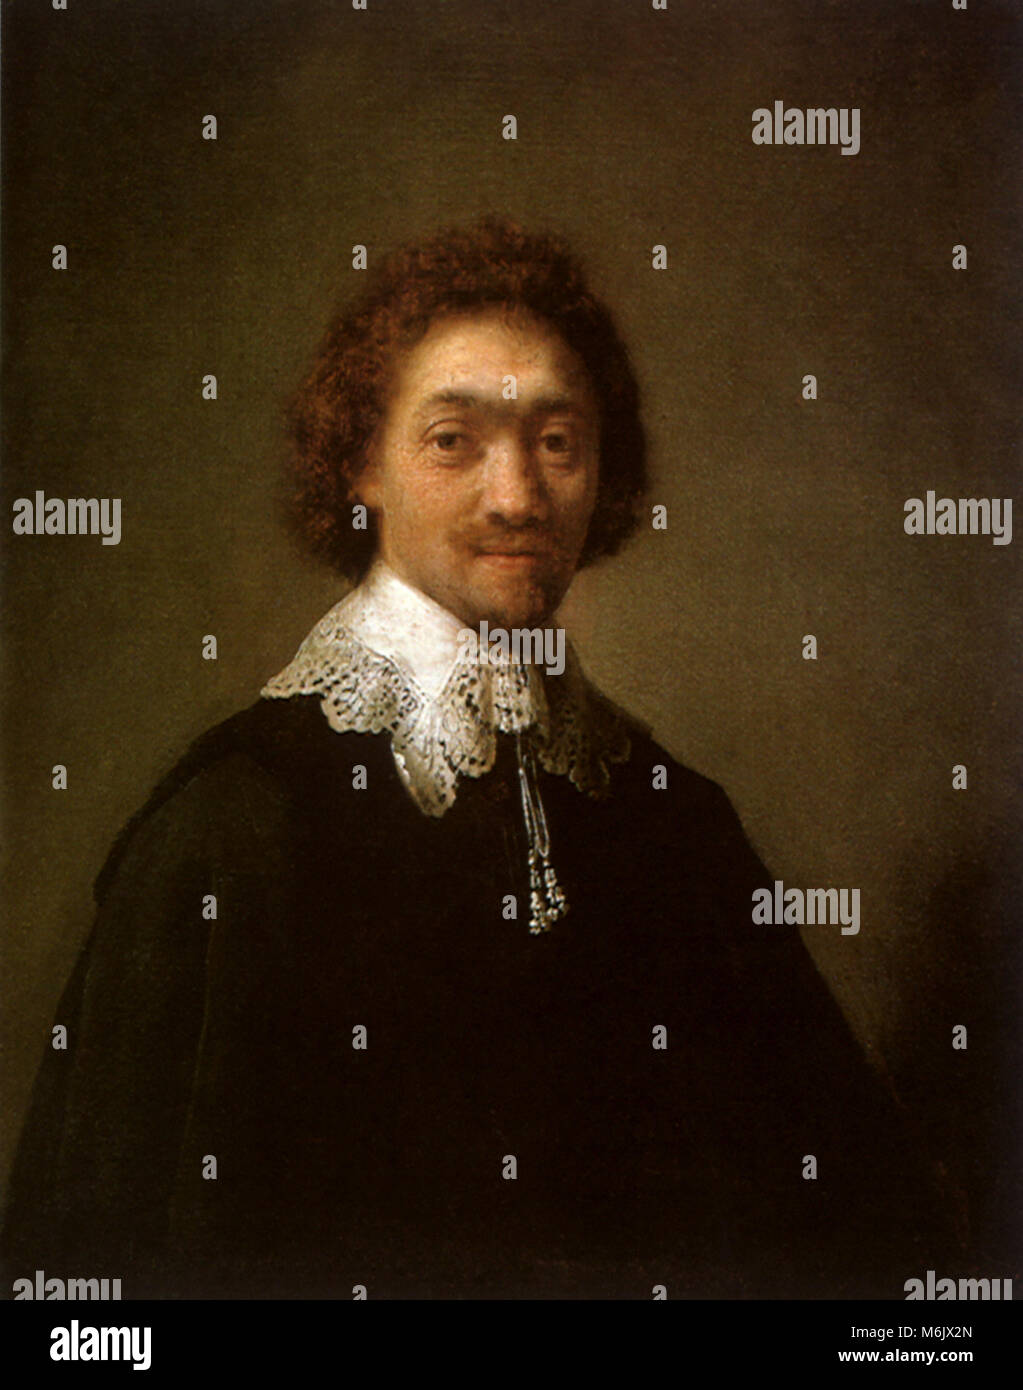 Maurits Huygens, Secretary to the Dutch Council of State, Rembrandt, Harmensz van Rijn, 1632. Stock Photo